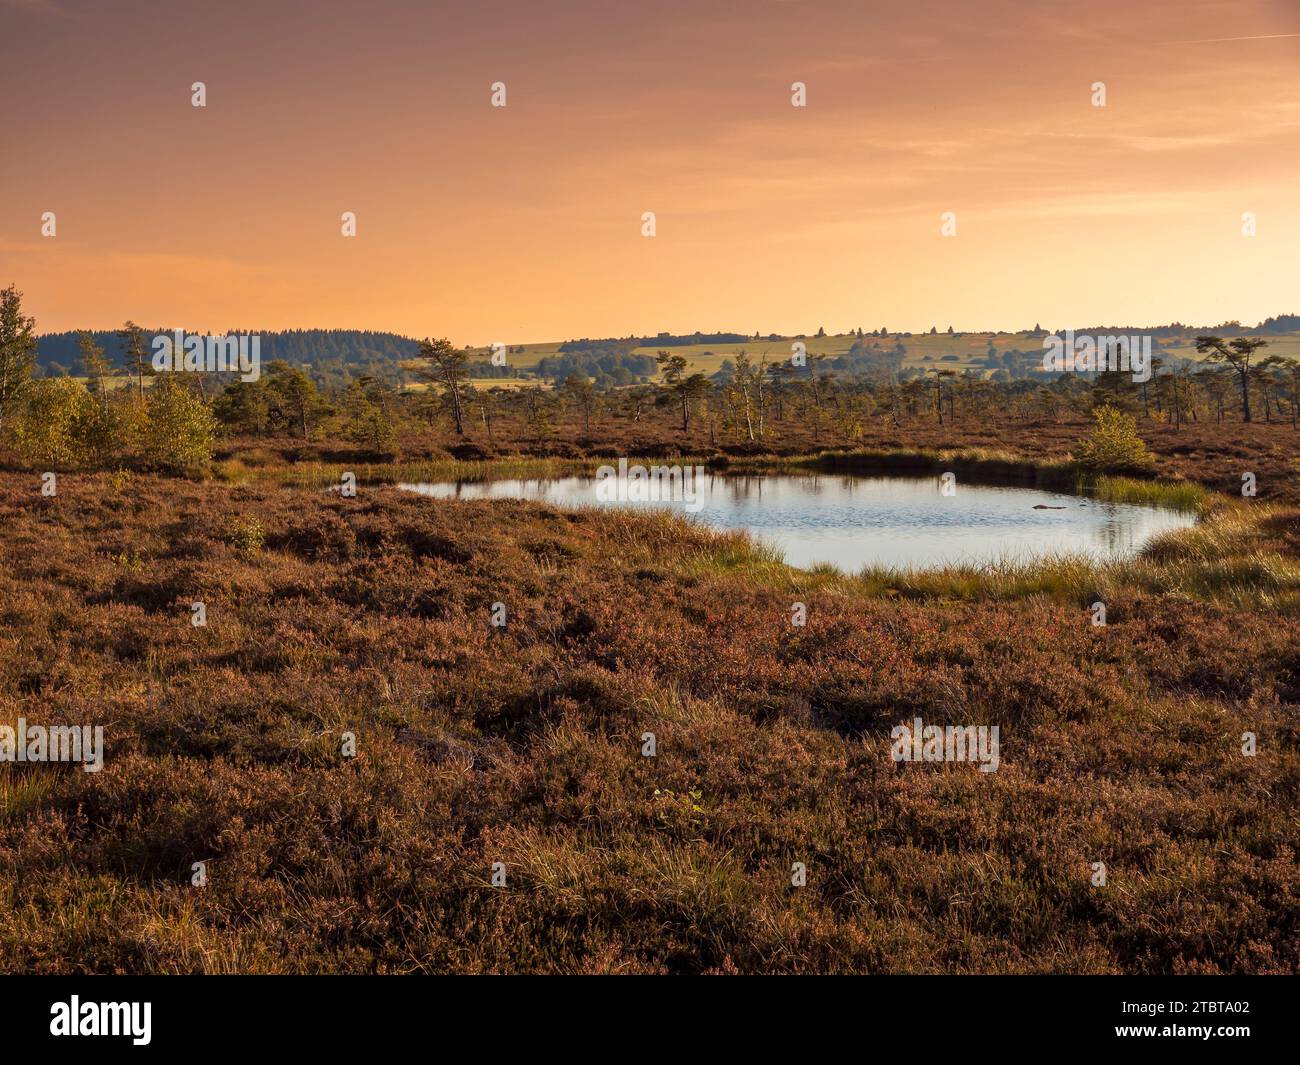 The Schwarzes Moor nature reserve in the evening light, Rhön Biosphere Reserve, Lower Franconia, Franconia, Bavaria, Germany Stock Photo